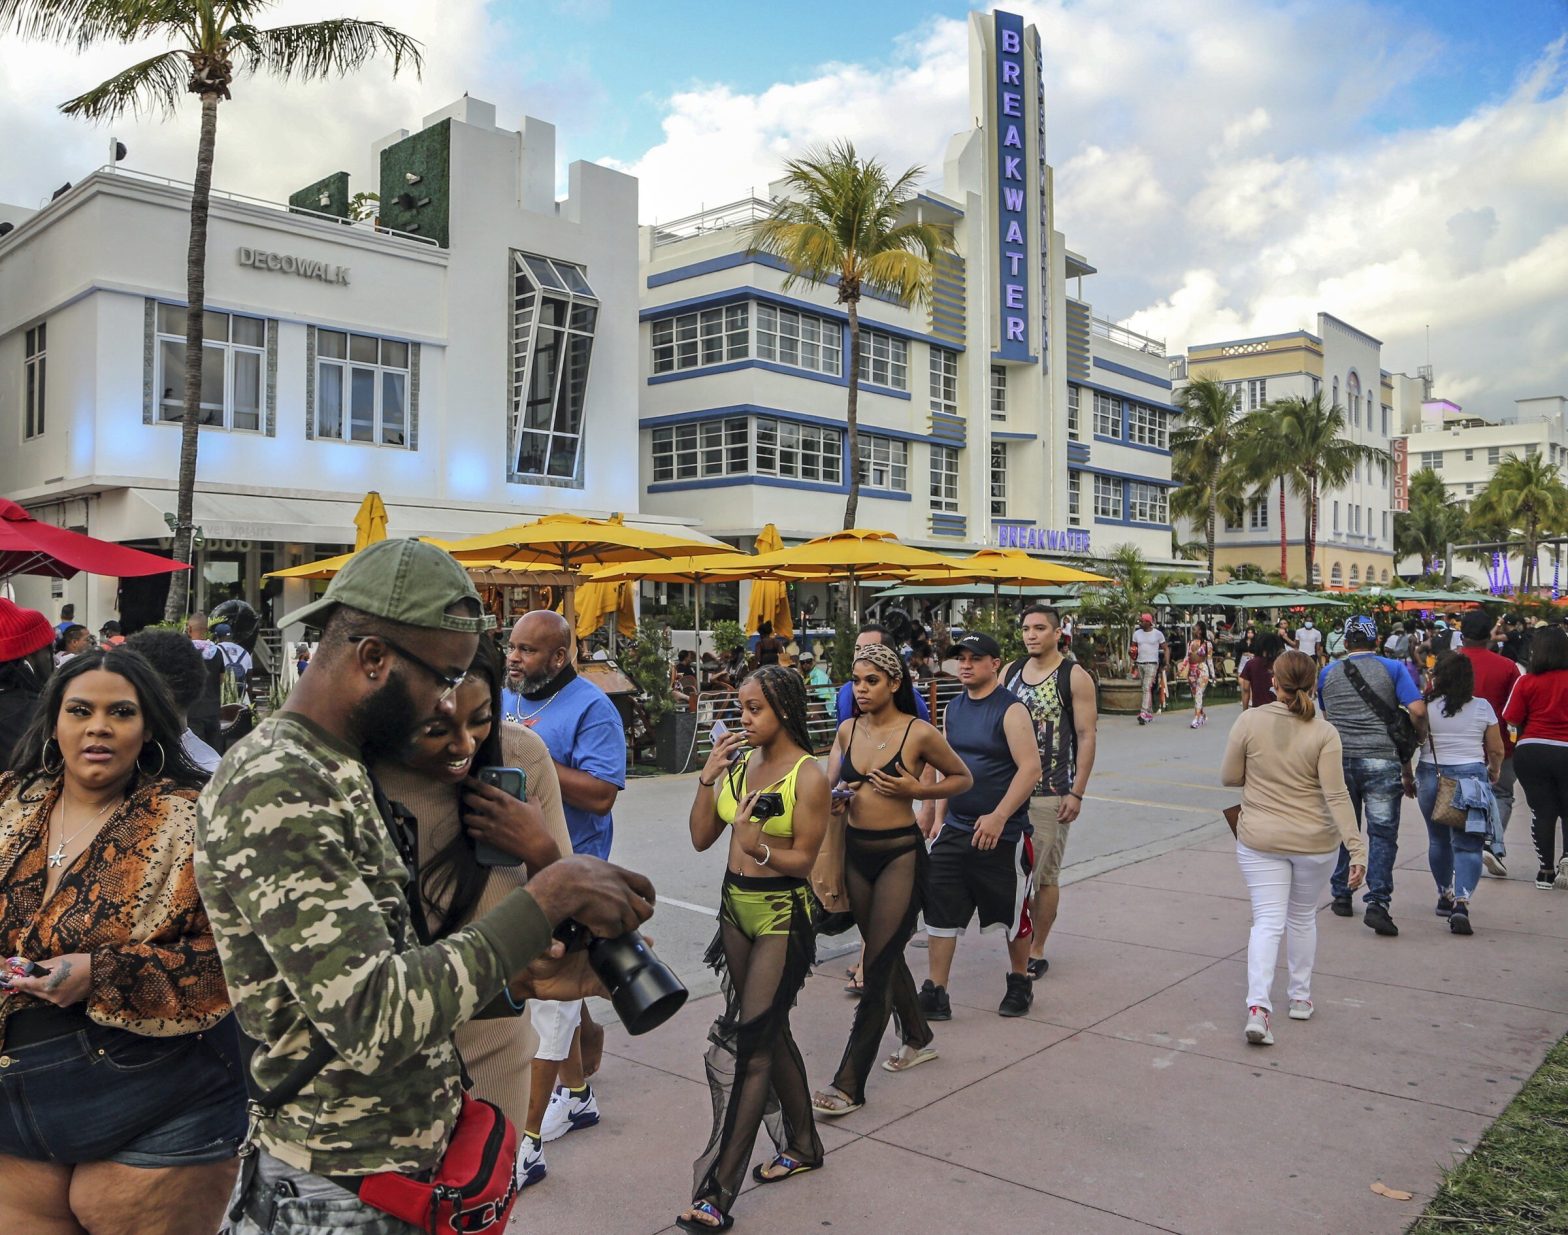 Two of Miami's top clubs close due to coronavirus state of emergency